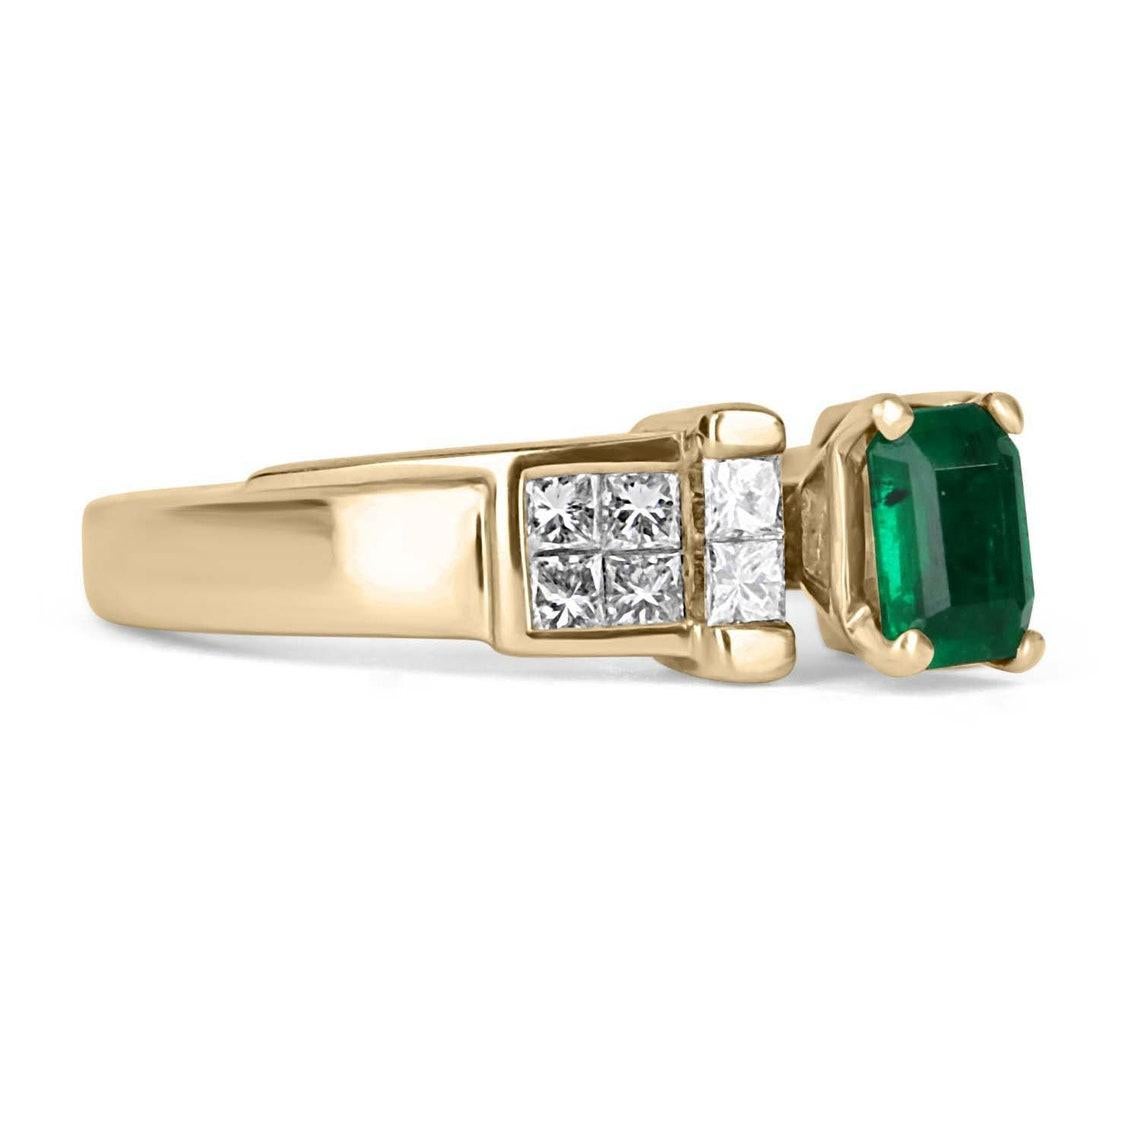 Displayed is a spectacular AAA Emerald Cut Colombian emerald and diamond princess cut ring. Skillfully set in 18k yellow gold, the sublime emerald weigh a perfect 0.63 carats and is set alongside H color (near colorless), VS-SI clarity princess cut